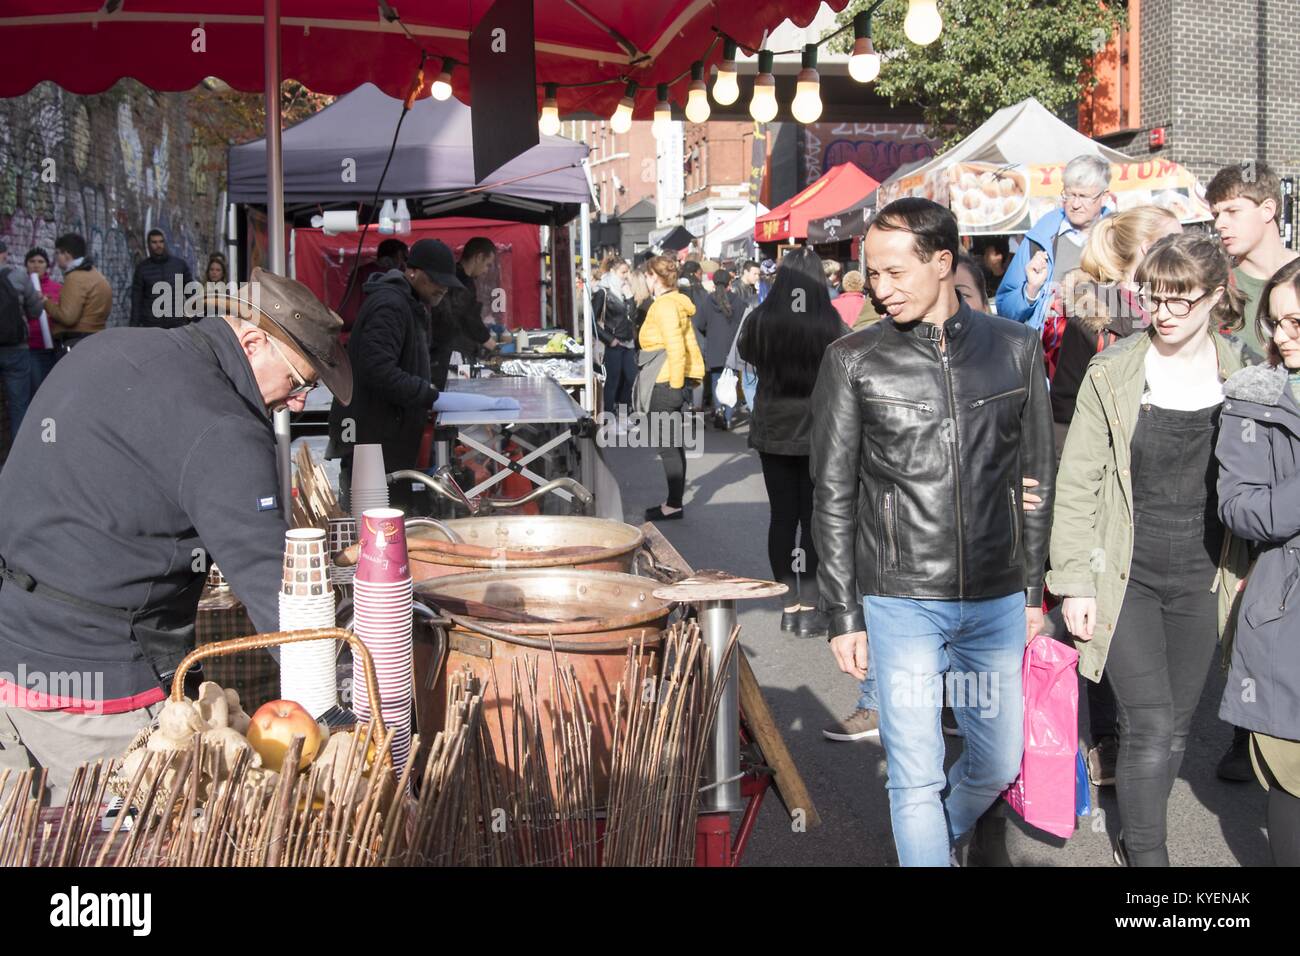 Millennial generation visitors look on as a man cooks street food at the Brick Lane Market, a major shopping district and outdoor market for secondhand goods in Tower Hamlets, East London, United Kingdom, October 29, 2017. () Stock Photo